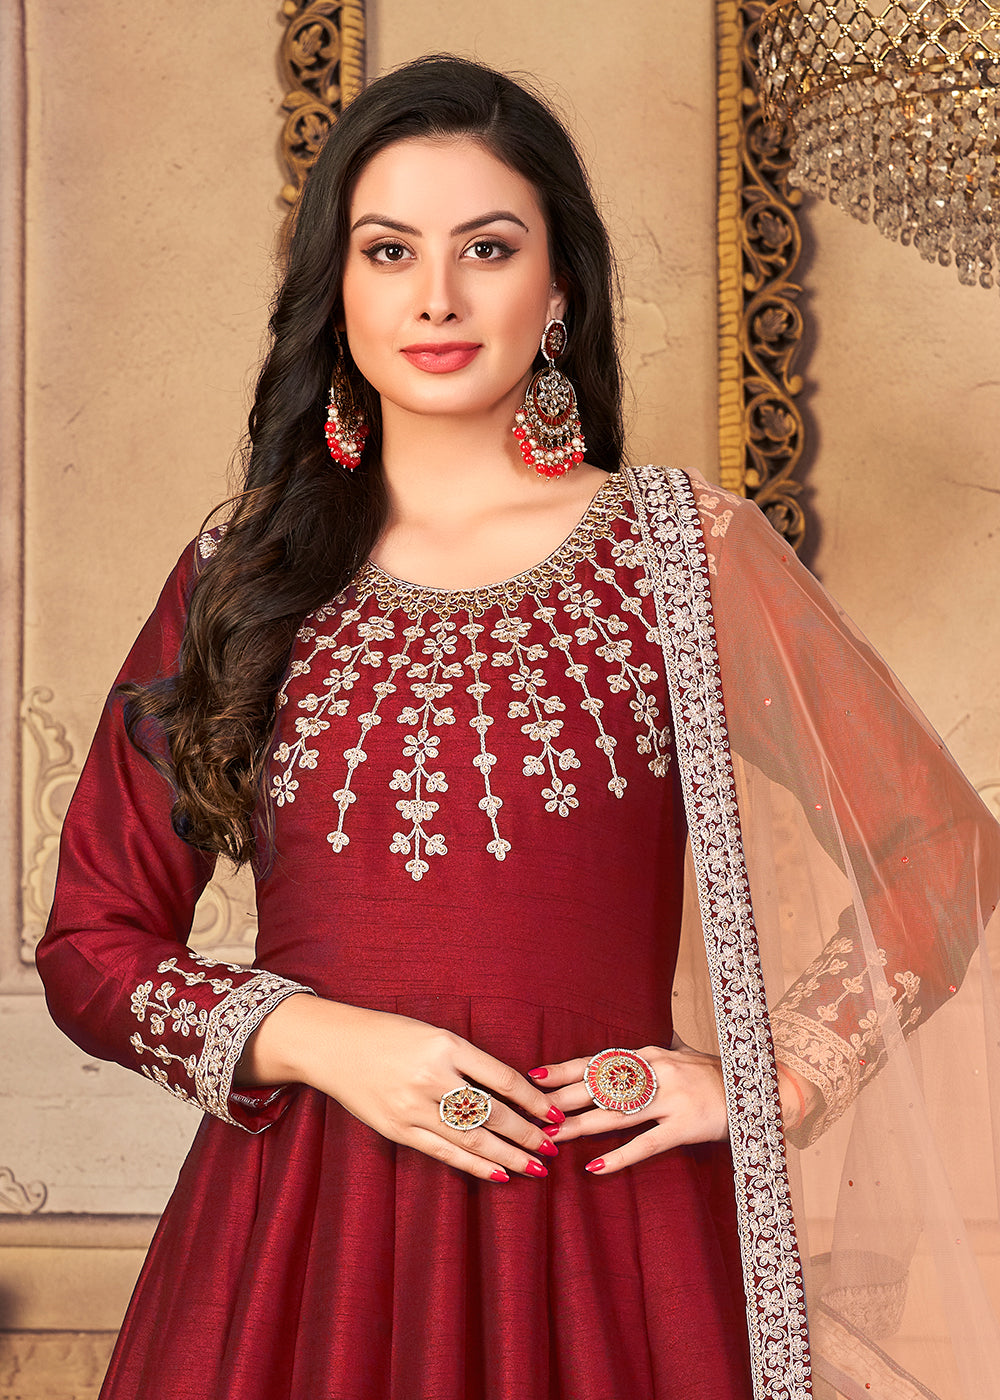 Buy Now Festive Stunning Red Embroidered Silk Anarkali Suit Online in Canada at Empress Clothing.